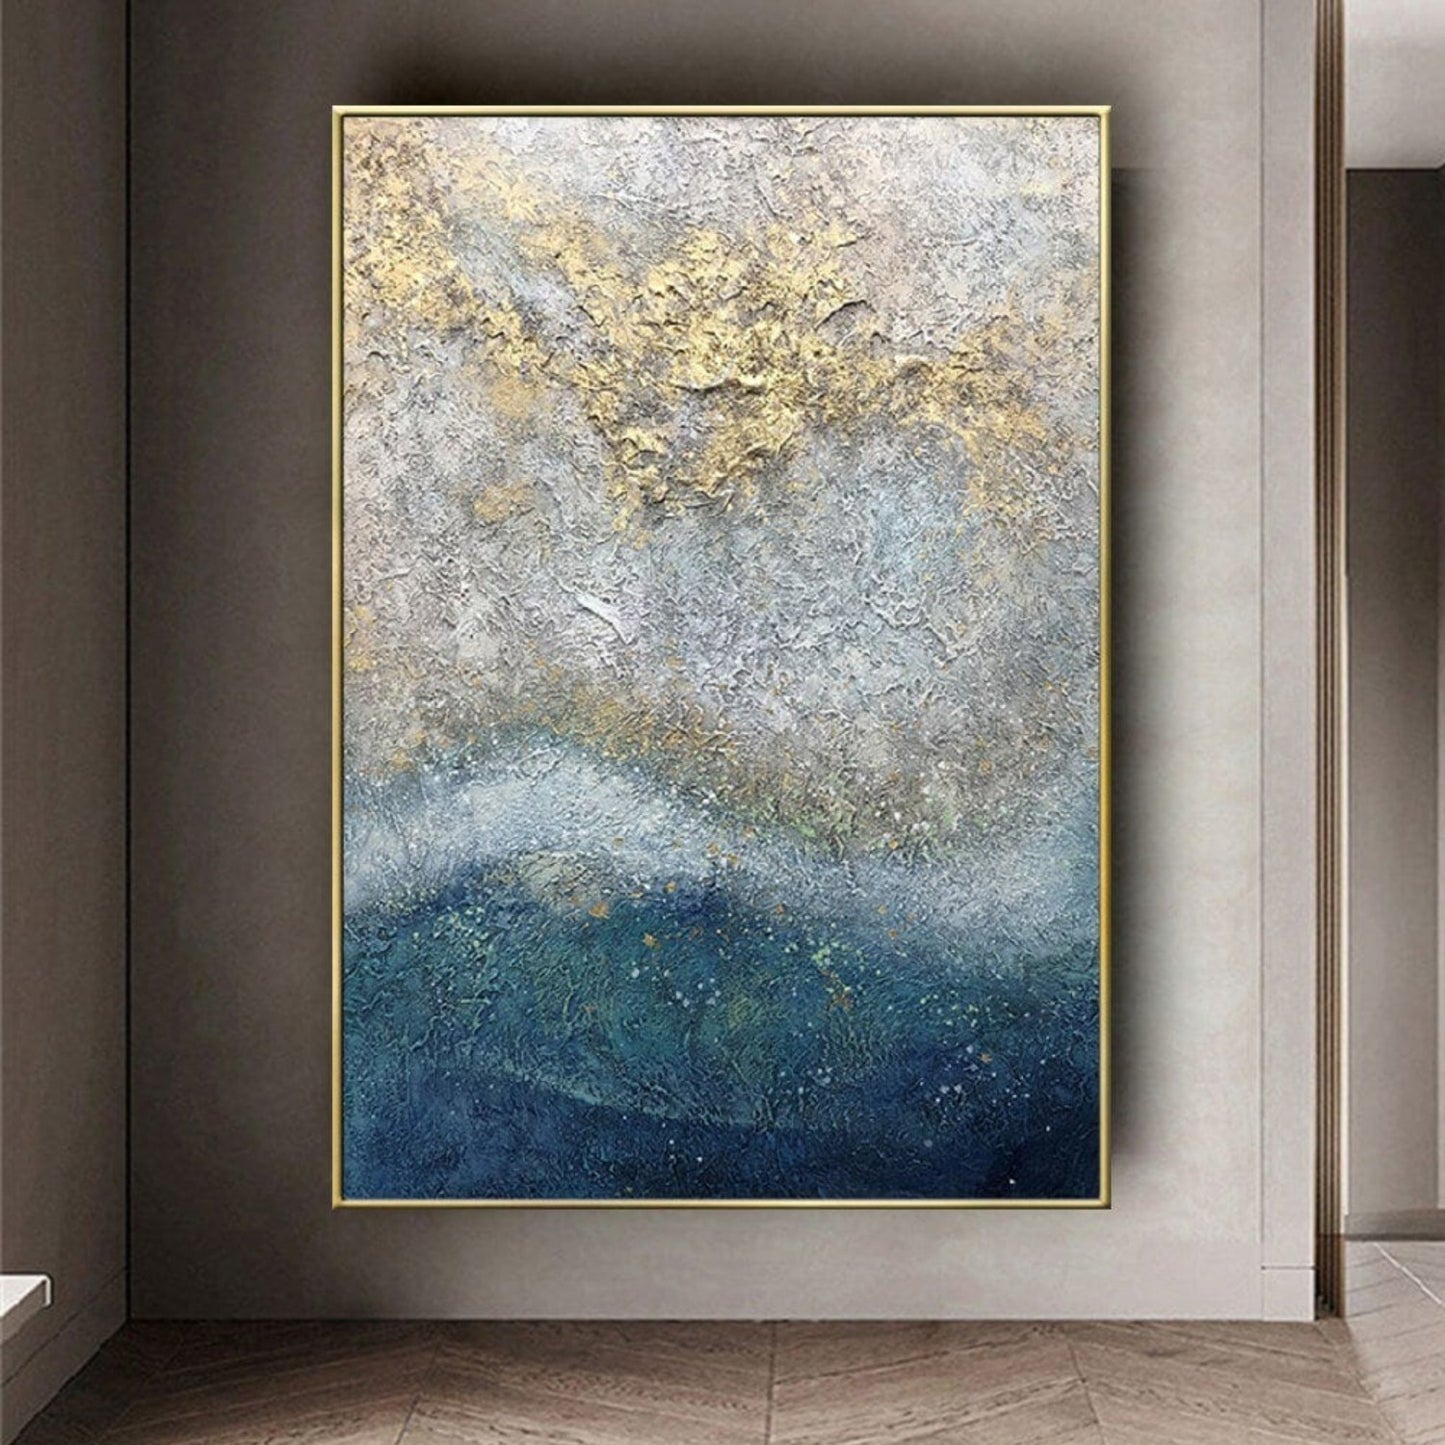 Gold Silver Textured Sea Hand Painted Landscape